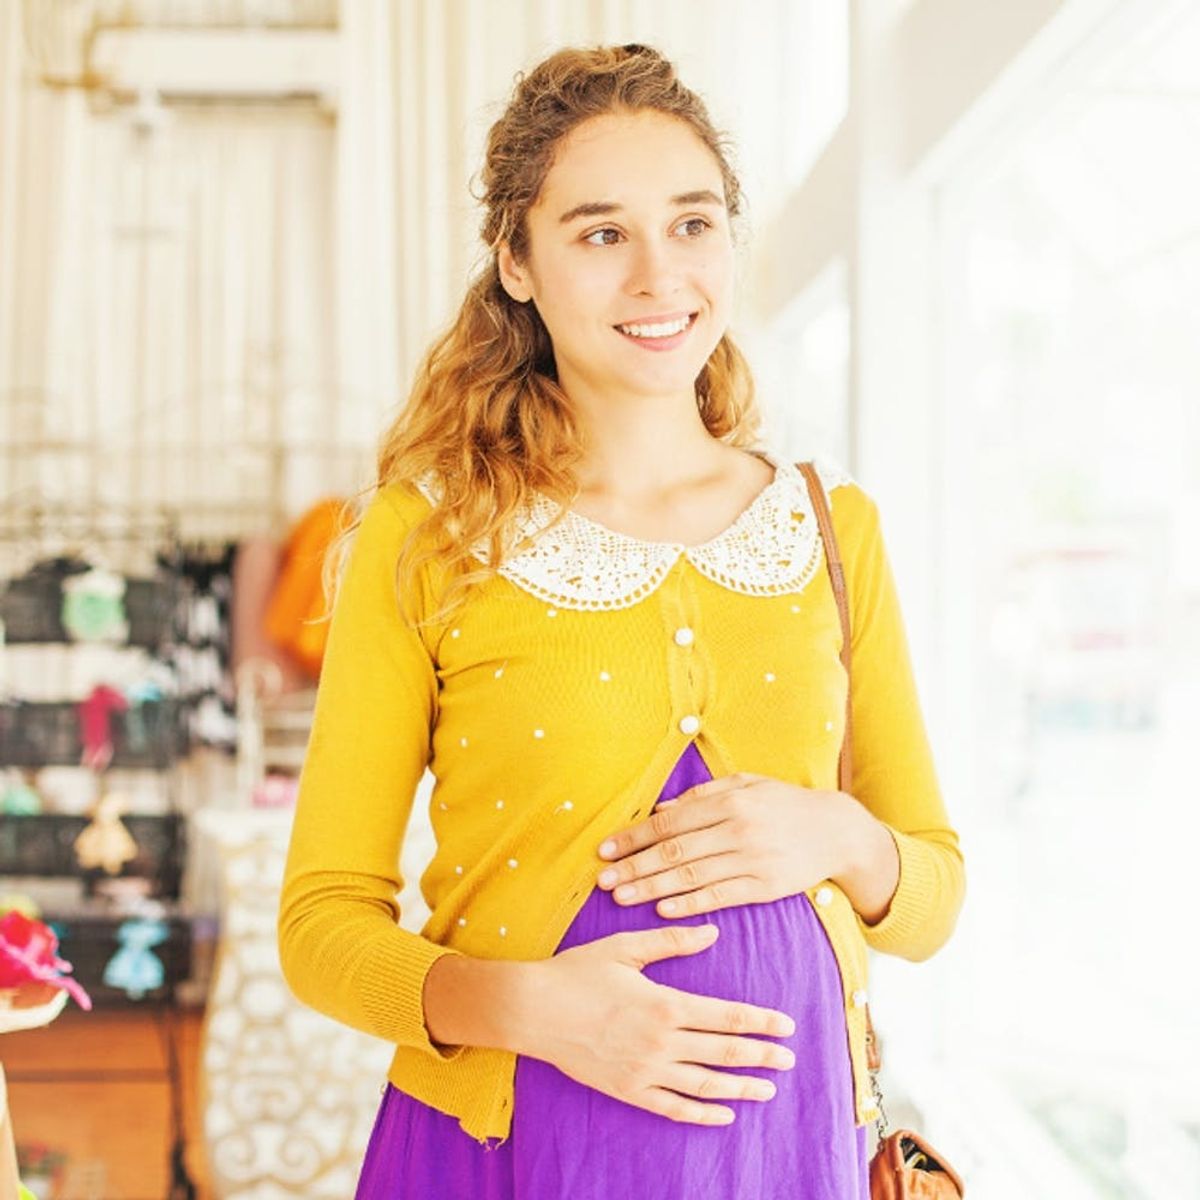 8 Things to Know About Your Second Trimester